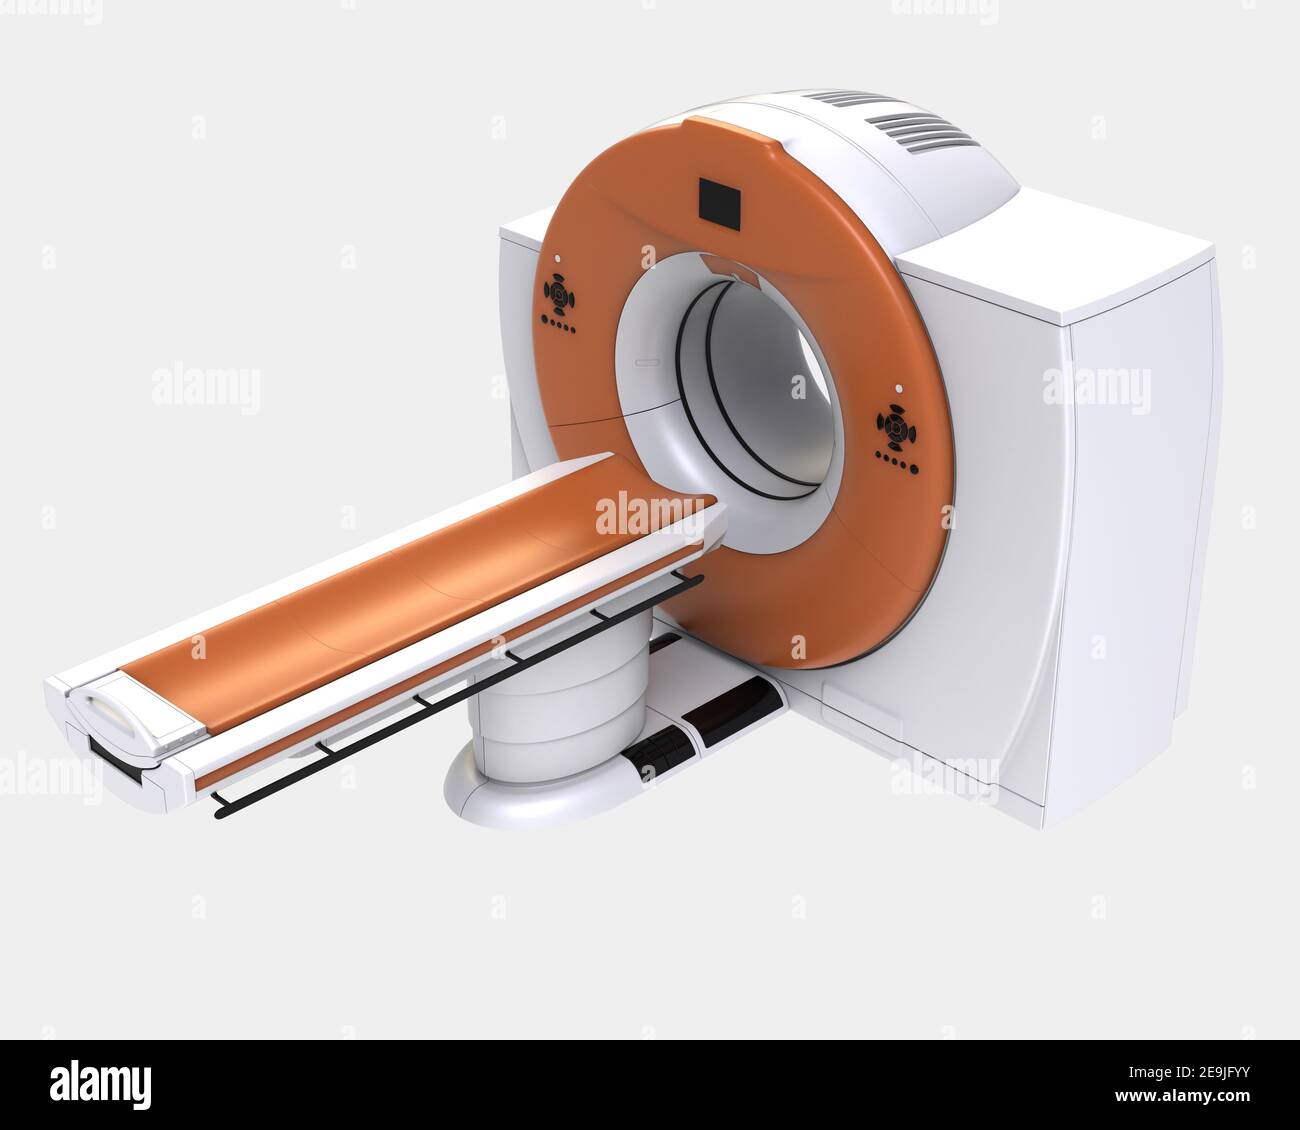 CT scanner isolated on background. Ideal for large publications or printing. 3d rendering - illustration Stock Photo